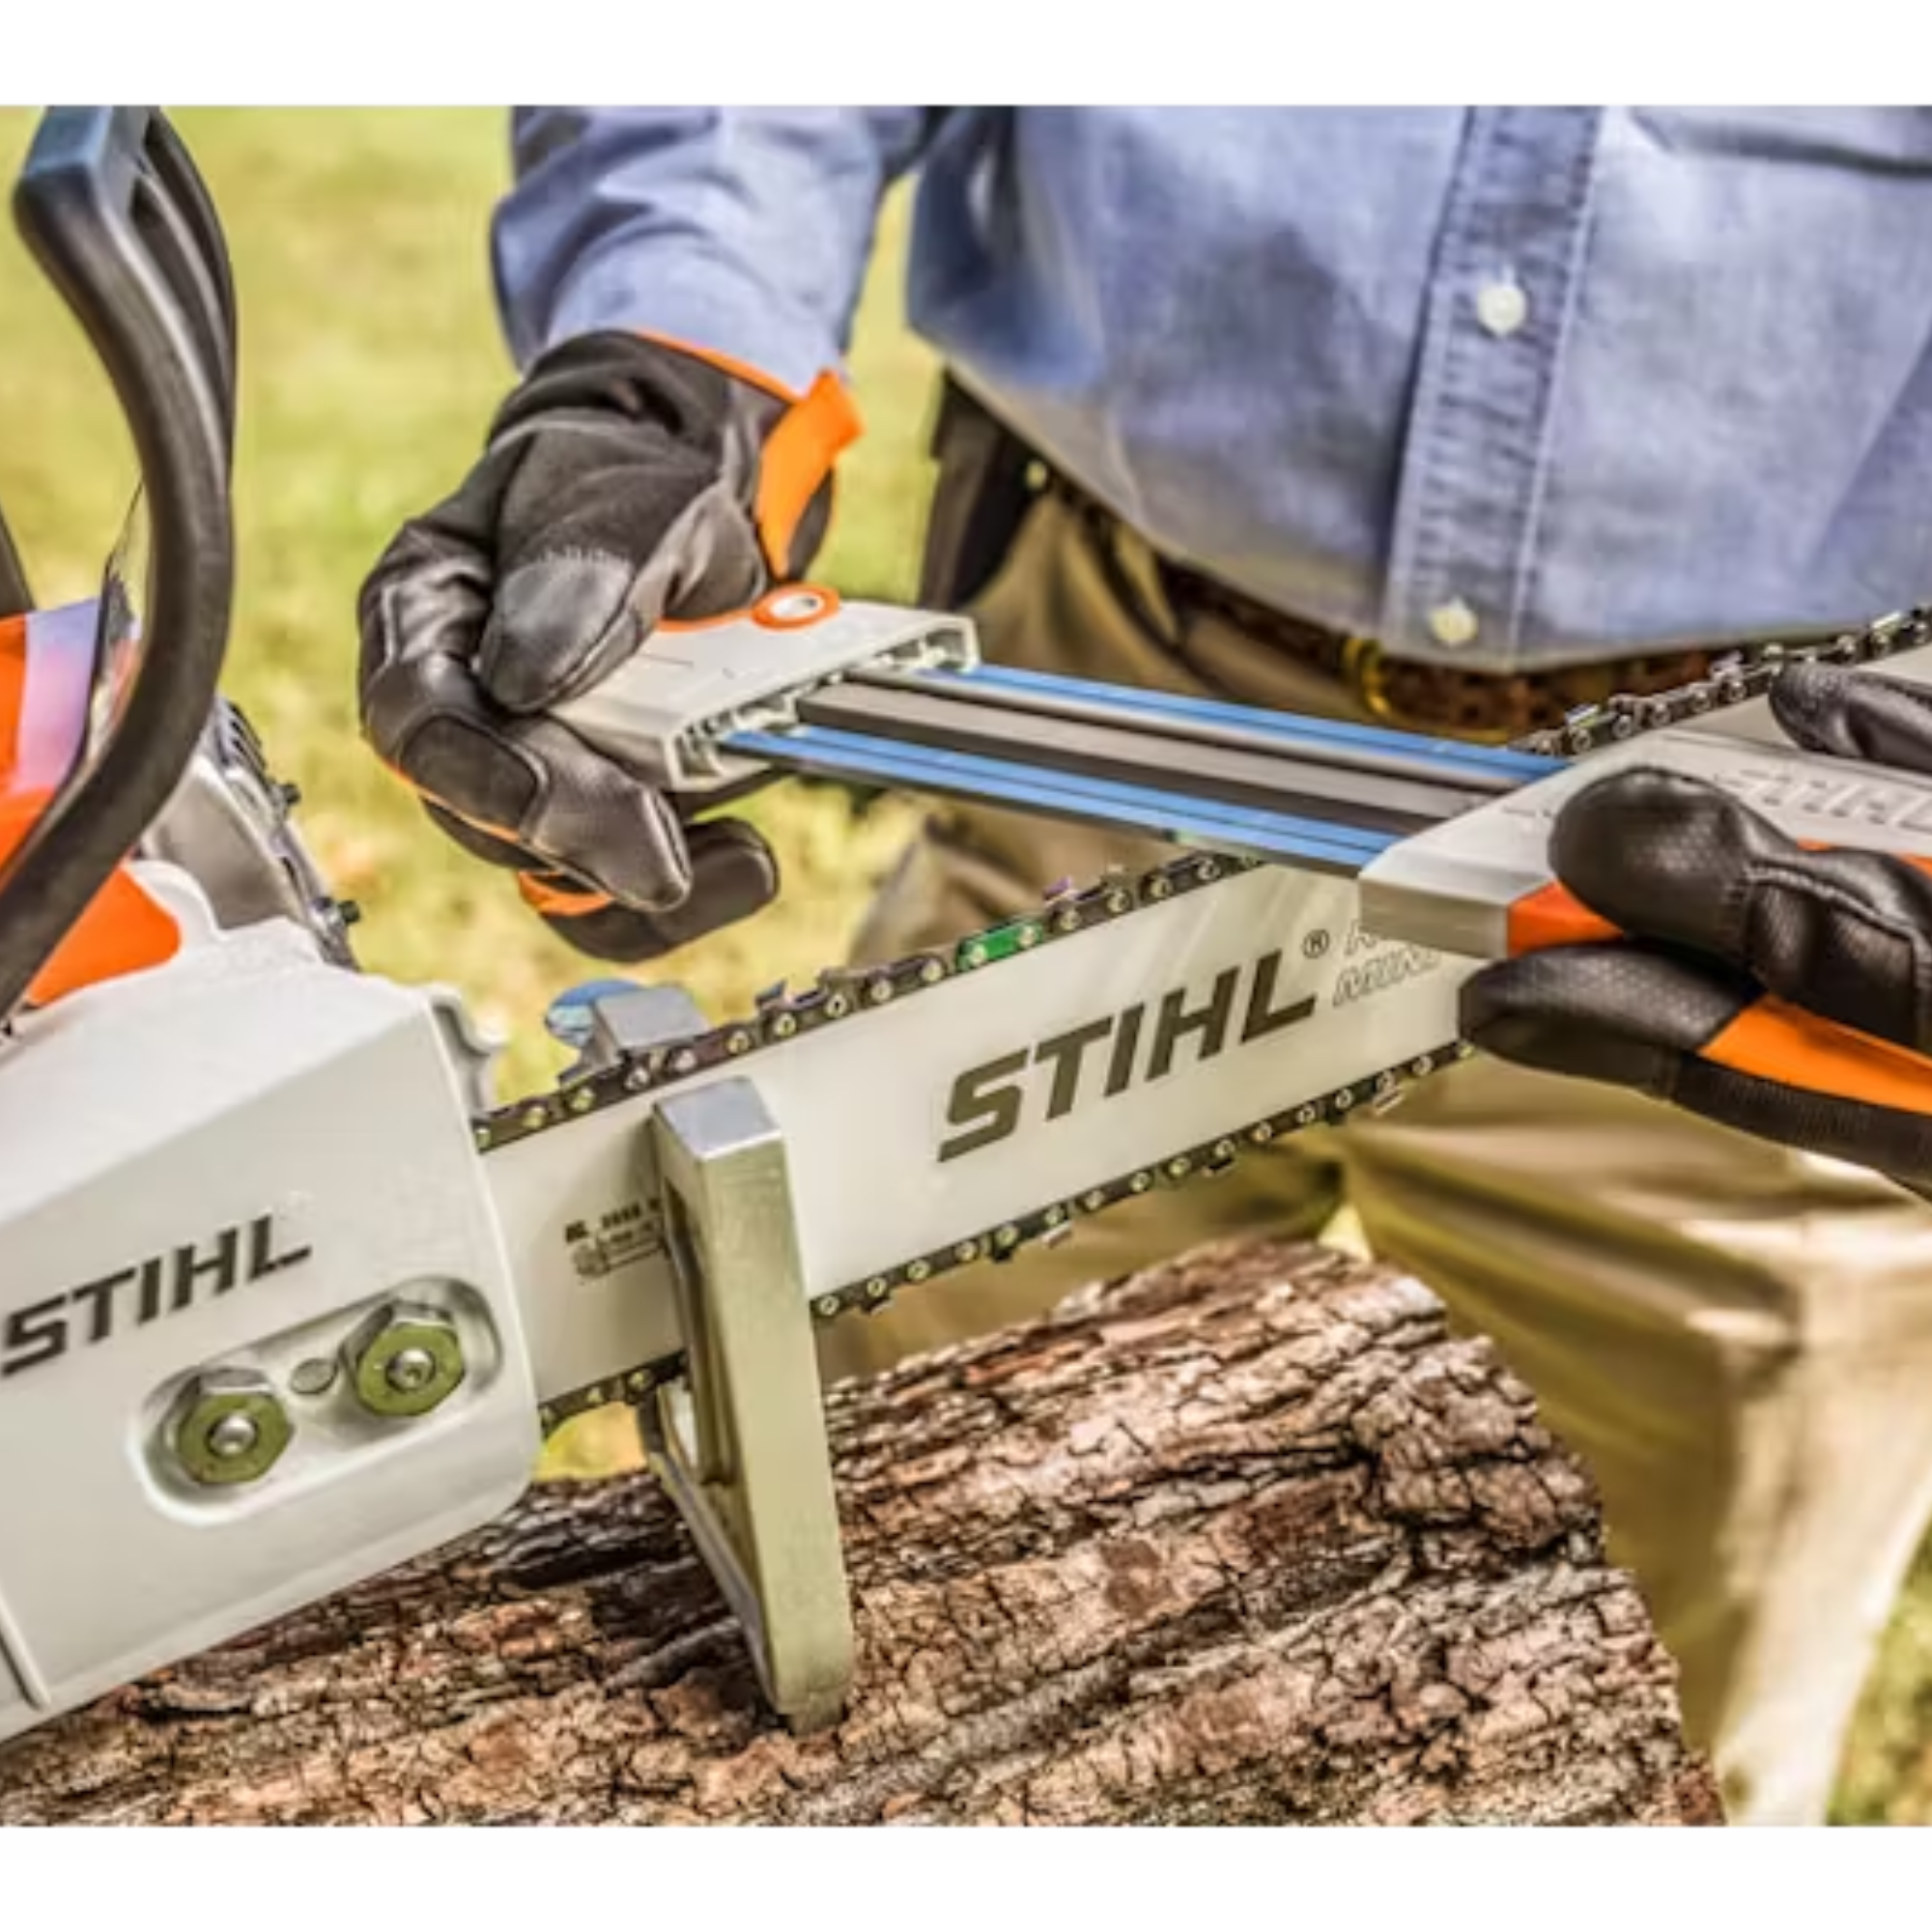 Stihl 2 in 1 Filing Guide & Saw Chain Sharpener 3/8in | 5605 750 4305